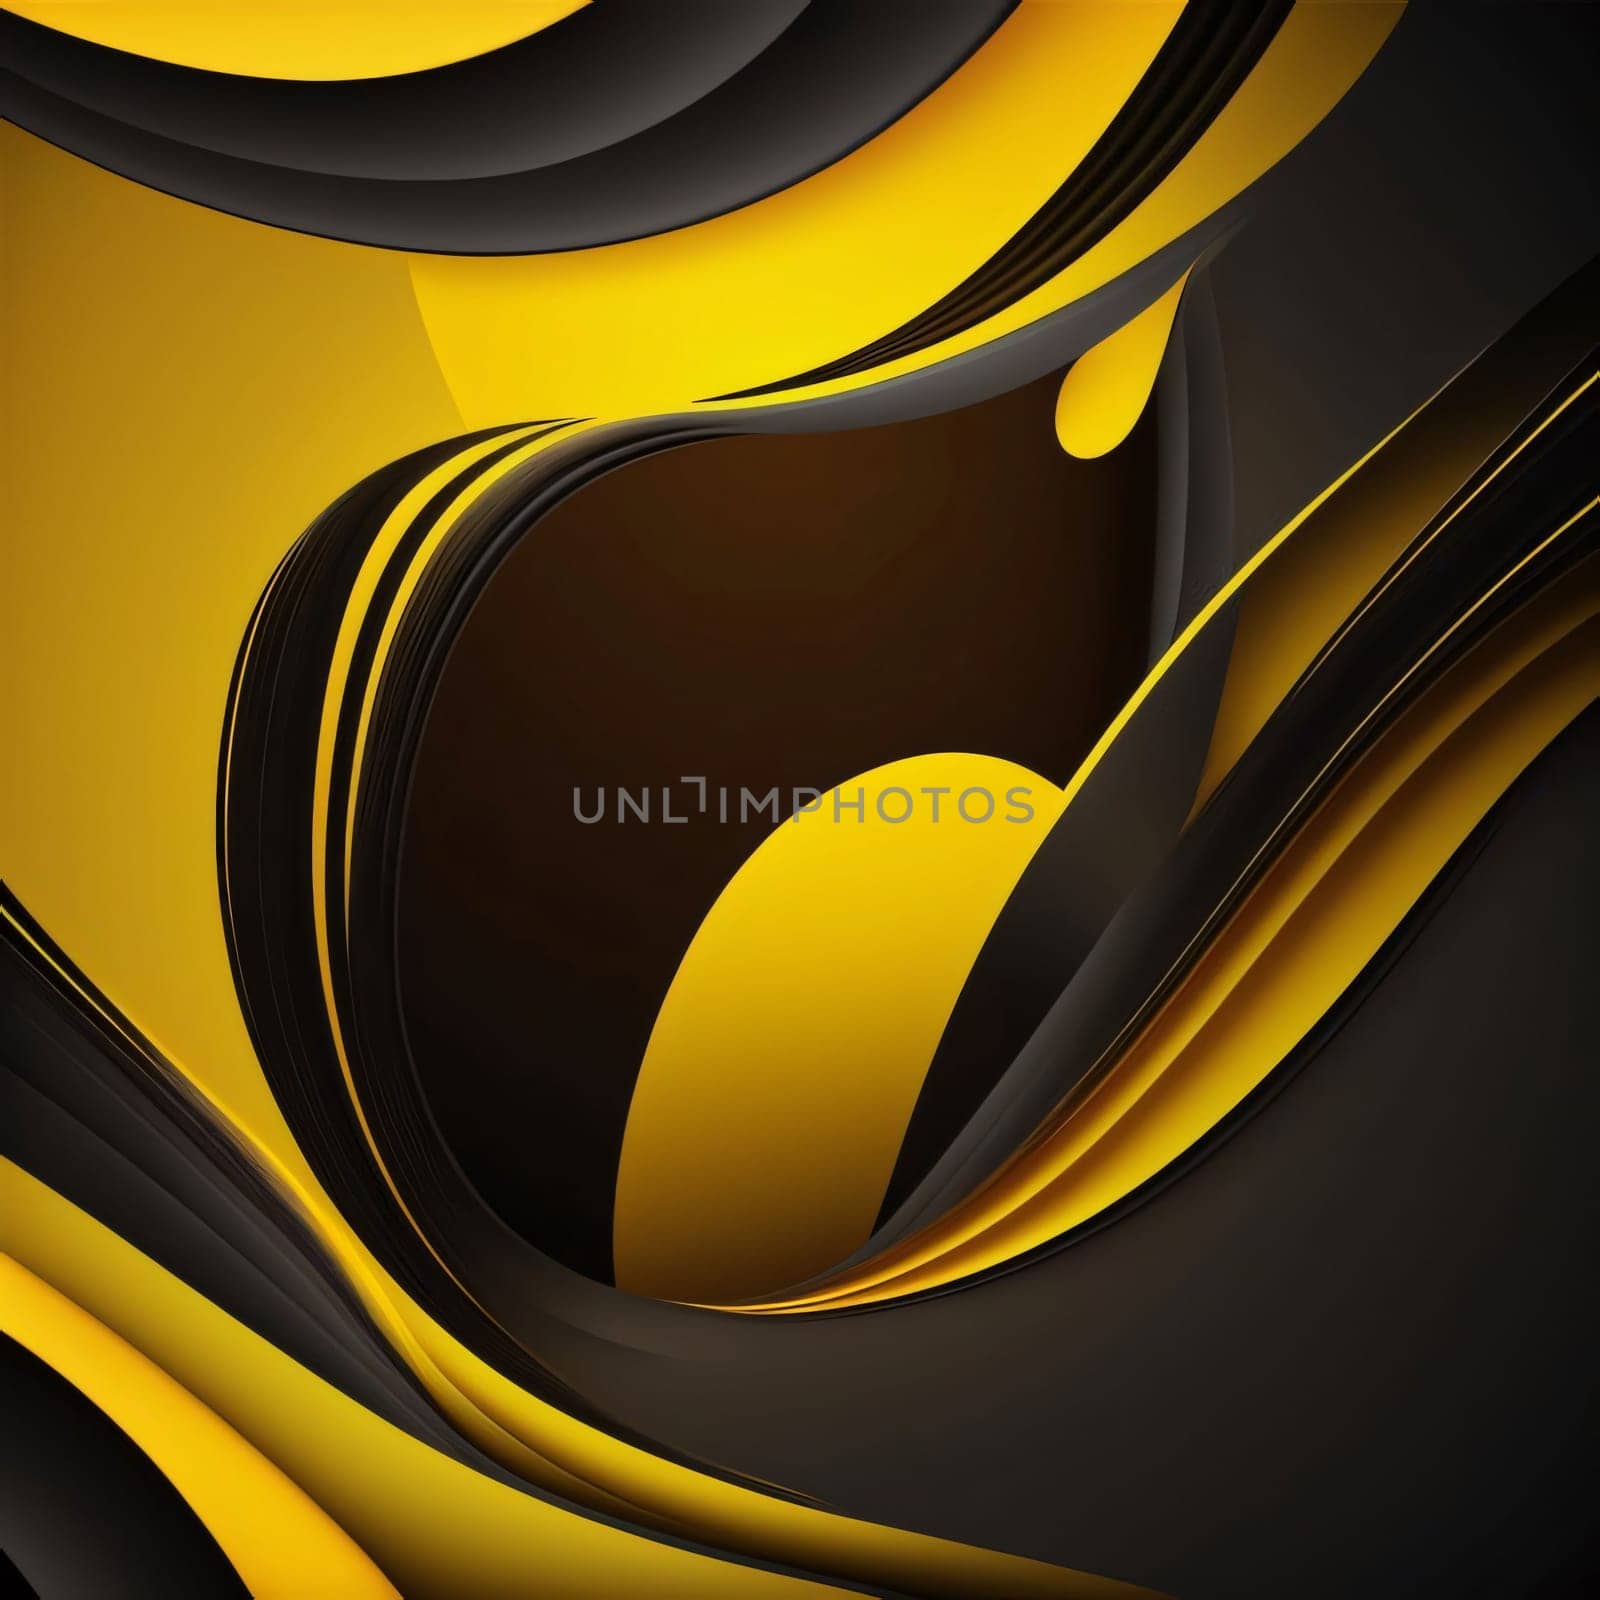 Abstract background design: Abstract background. Vector illustration. Eps 10. Black and yellow colors